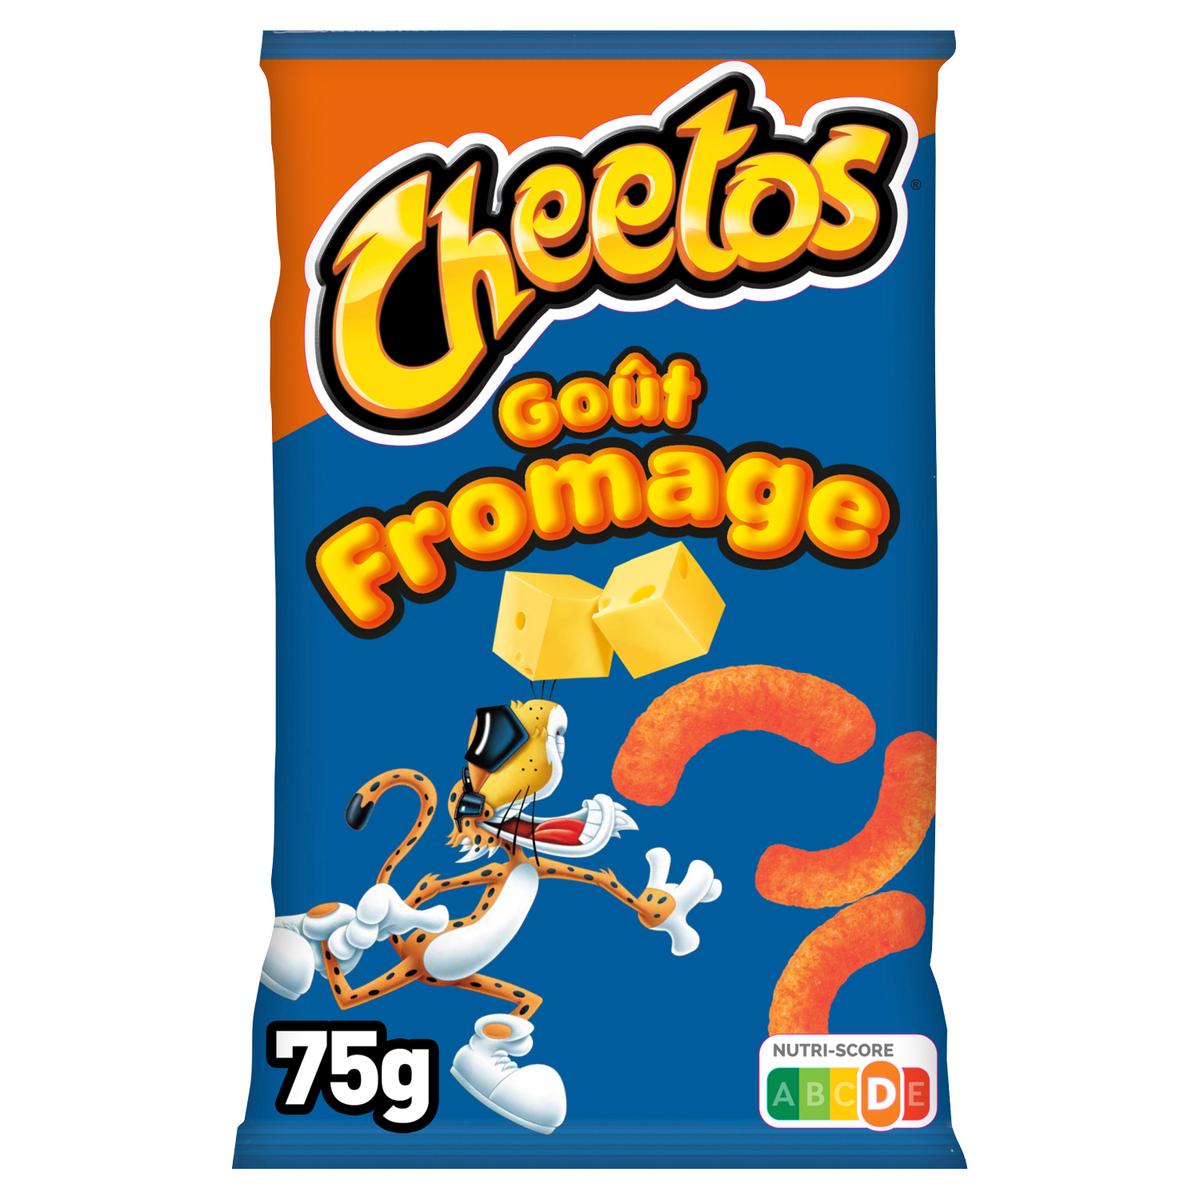 Cheetos Puffs Fromage (France) 75g - Candy Mail UK